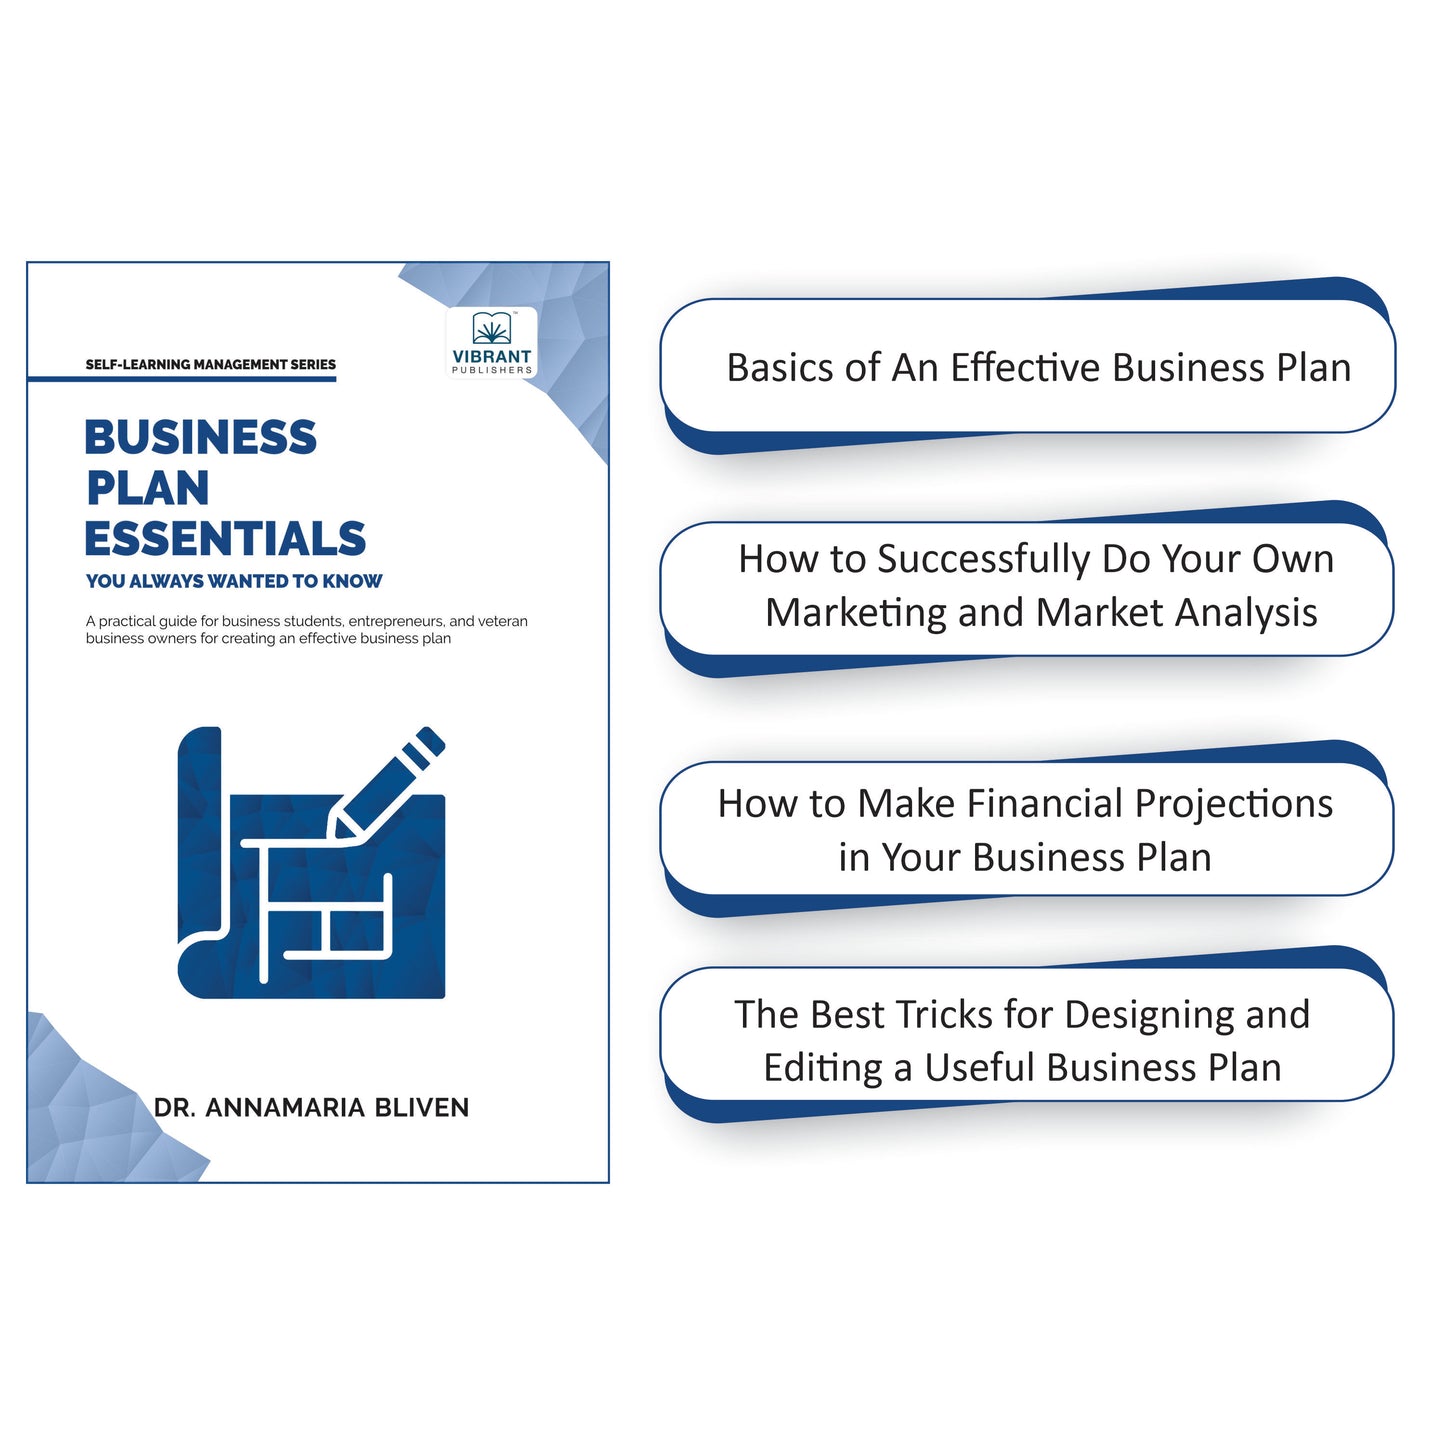 Entrepreneurship and Strategy Essentials for new and experienced entrepreneurs - Includes books on strategy, planning, and entrepreneurship